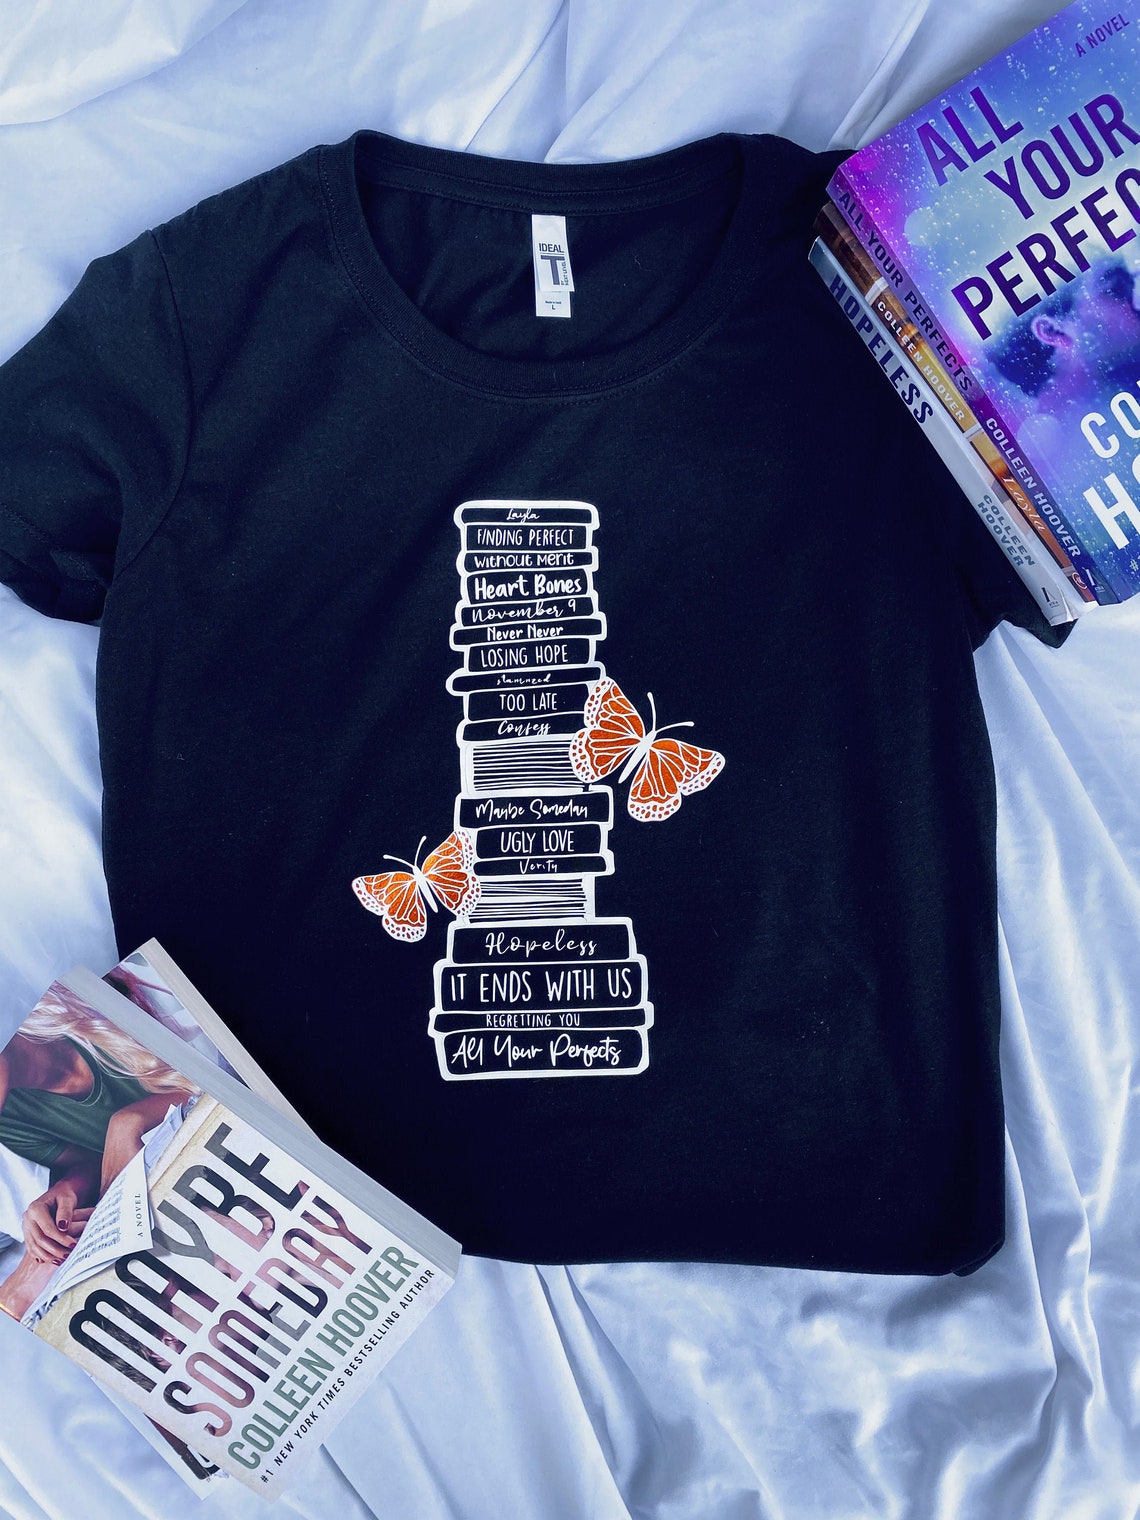 Colleen Hoover Book Stack T-shirt | Etsy